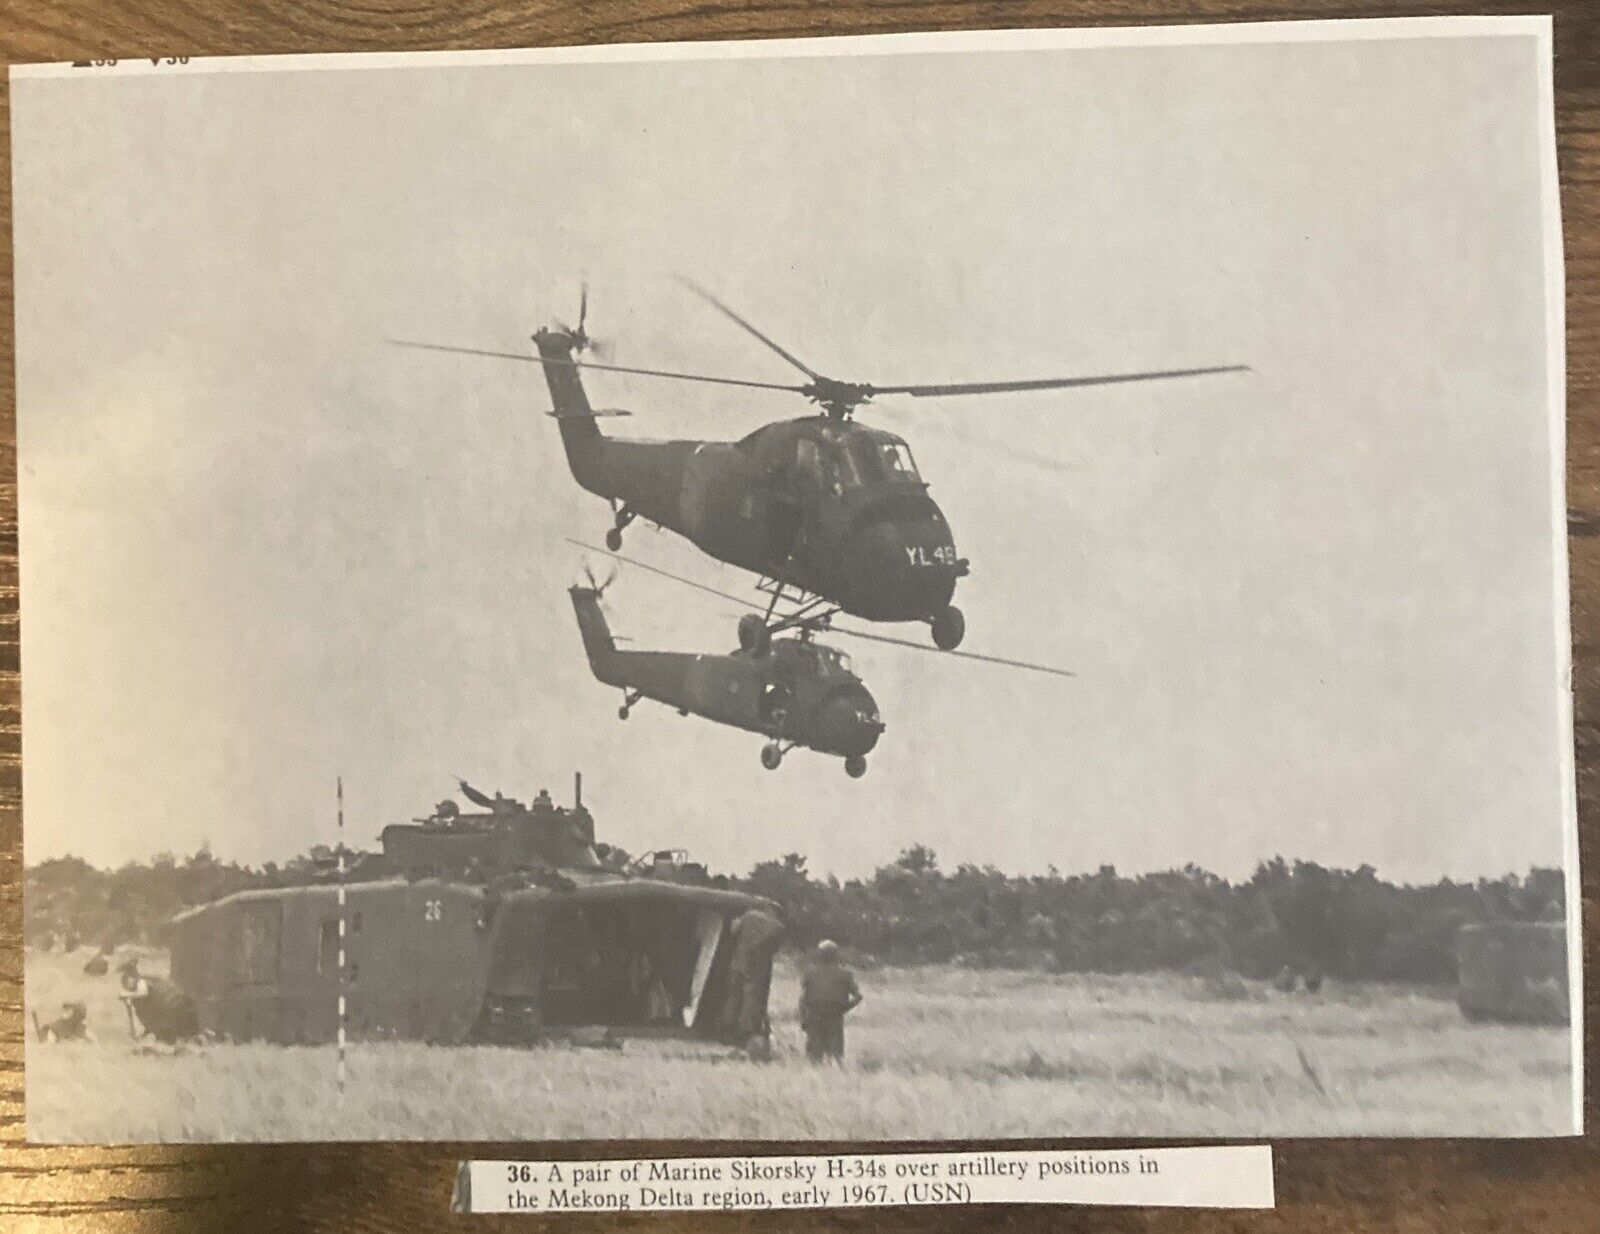 Book Clipping Photo Marine Sikorsky H-34’s Mekong Delta Vietnam 1967